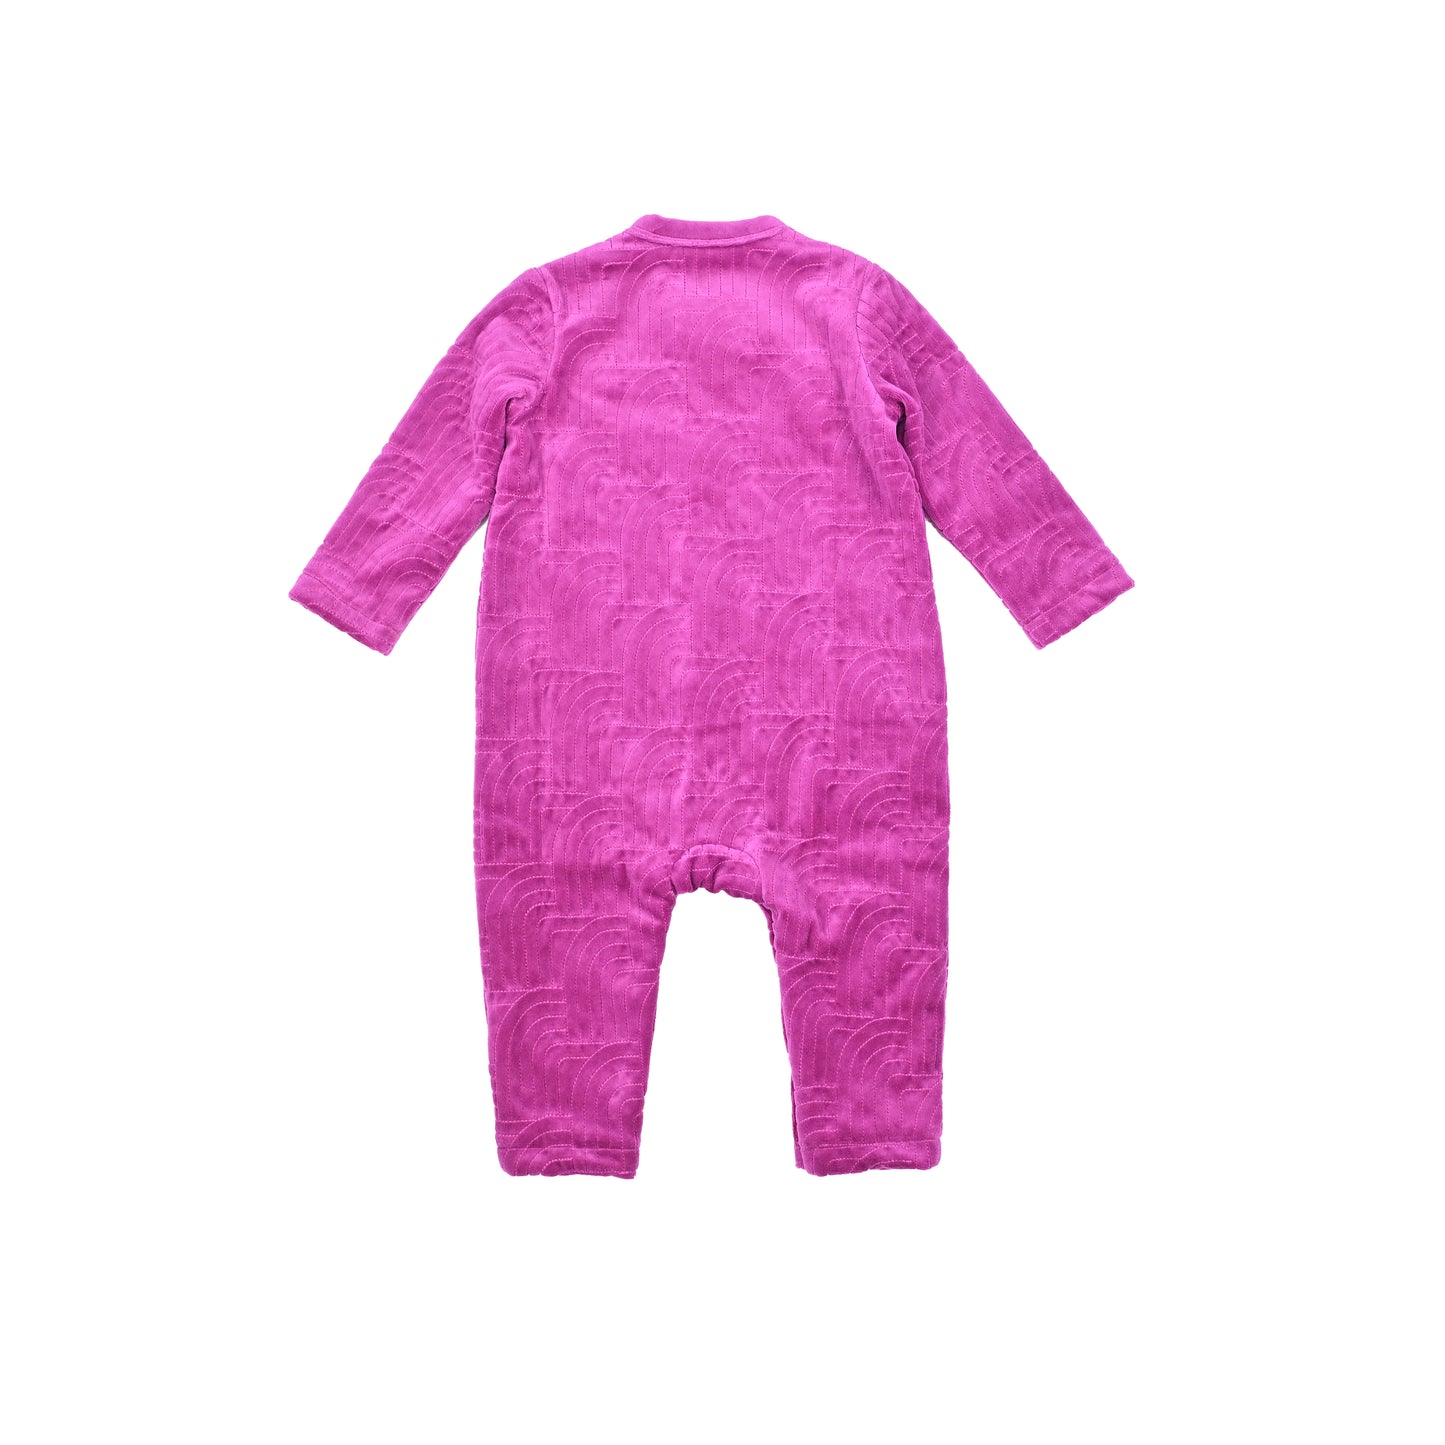 BABY VELOUR RAINBOW EMBROIDERED SIDE BUTTON PLAYSUIT